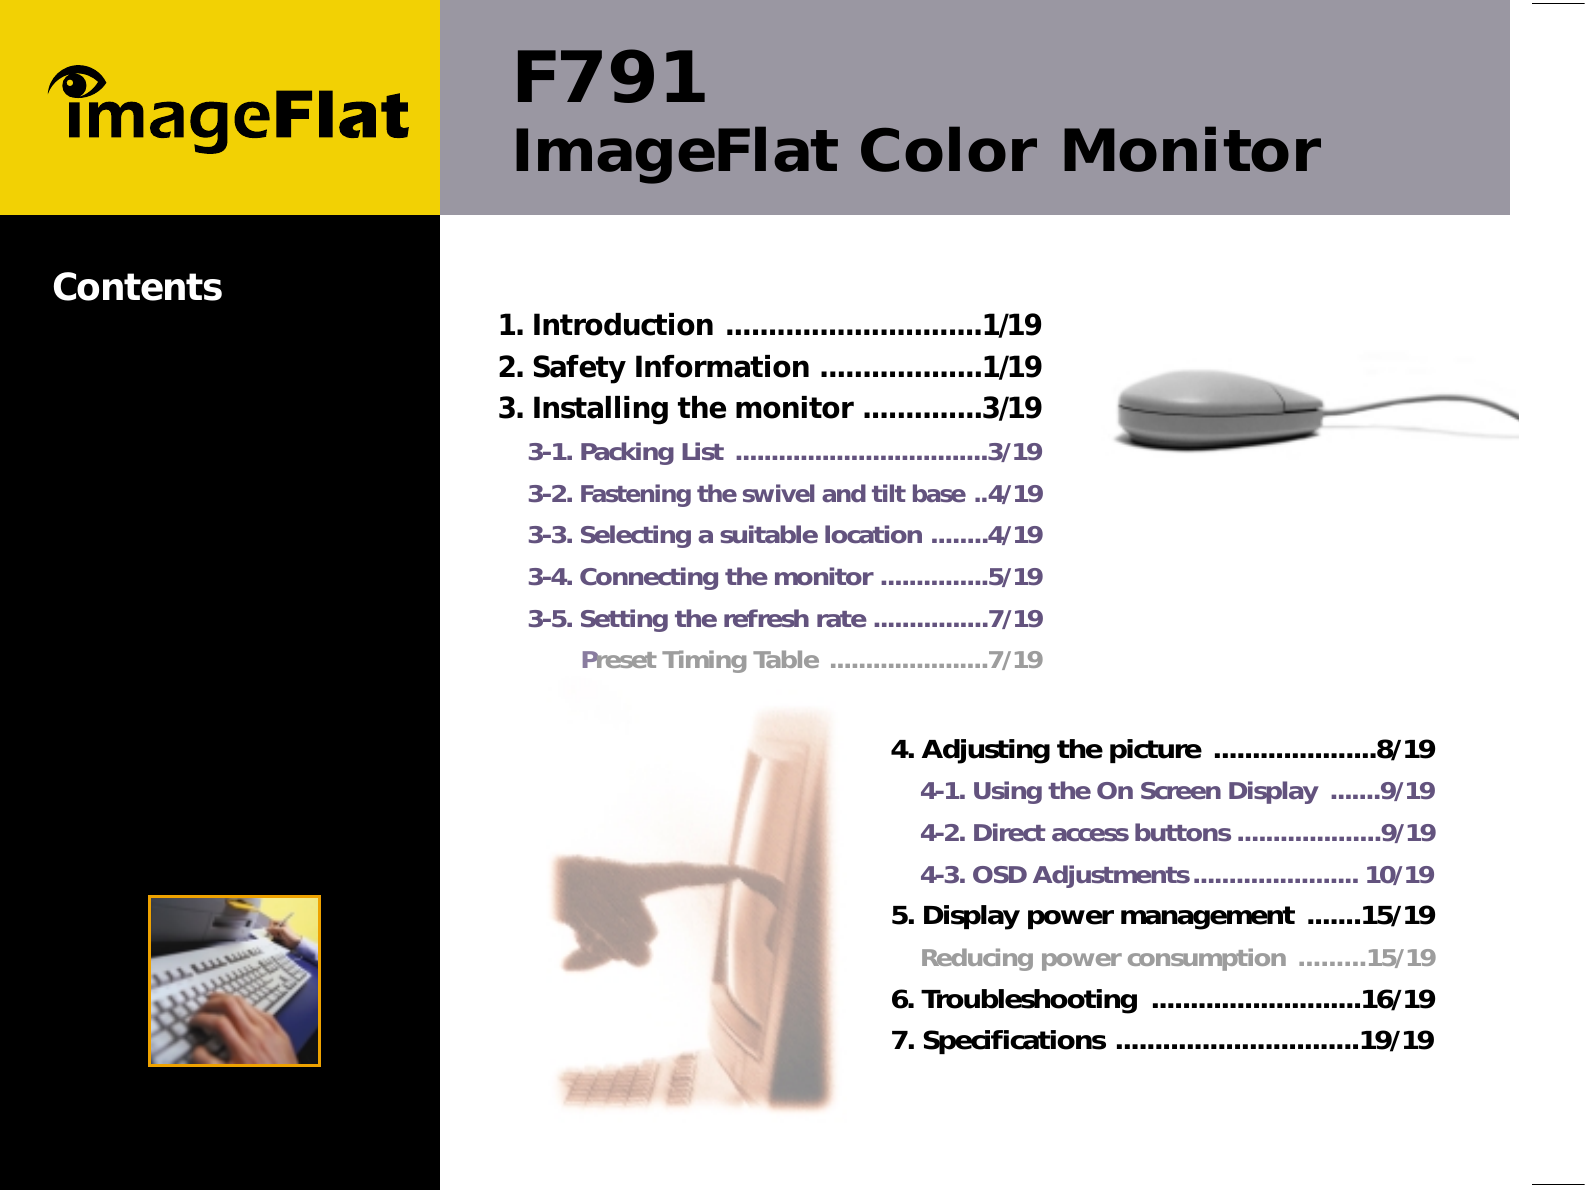 F791ImageFlat Color MonitorContents 1. Introduction ..............................1/19 2. Safety Information ...................1/193. Installing the monitor ..............3/193-1. Packing List ...................................3/193-2. Fastening the swivel and tilt base ..4/193-3. Selecting a suitable location ........4/193-4. Connecting the monitor ...............5/193-5. Setting the refresh rate ................7/19Preset Timing Table ......................7/194. Adjusting the picture .....................8/194-1. Using the On Screen Display .......9/194-2. Direct access buttons ....................9/194-3. OSD Adjustments....................... 10/195. Display power management .......15/19Reducing power consumption .........15/196. Troubleshooting  ...........................16/197. Specifications ...............................19/19